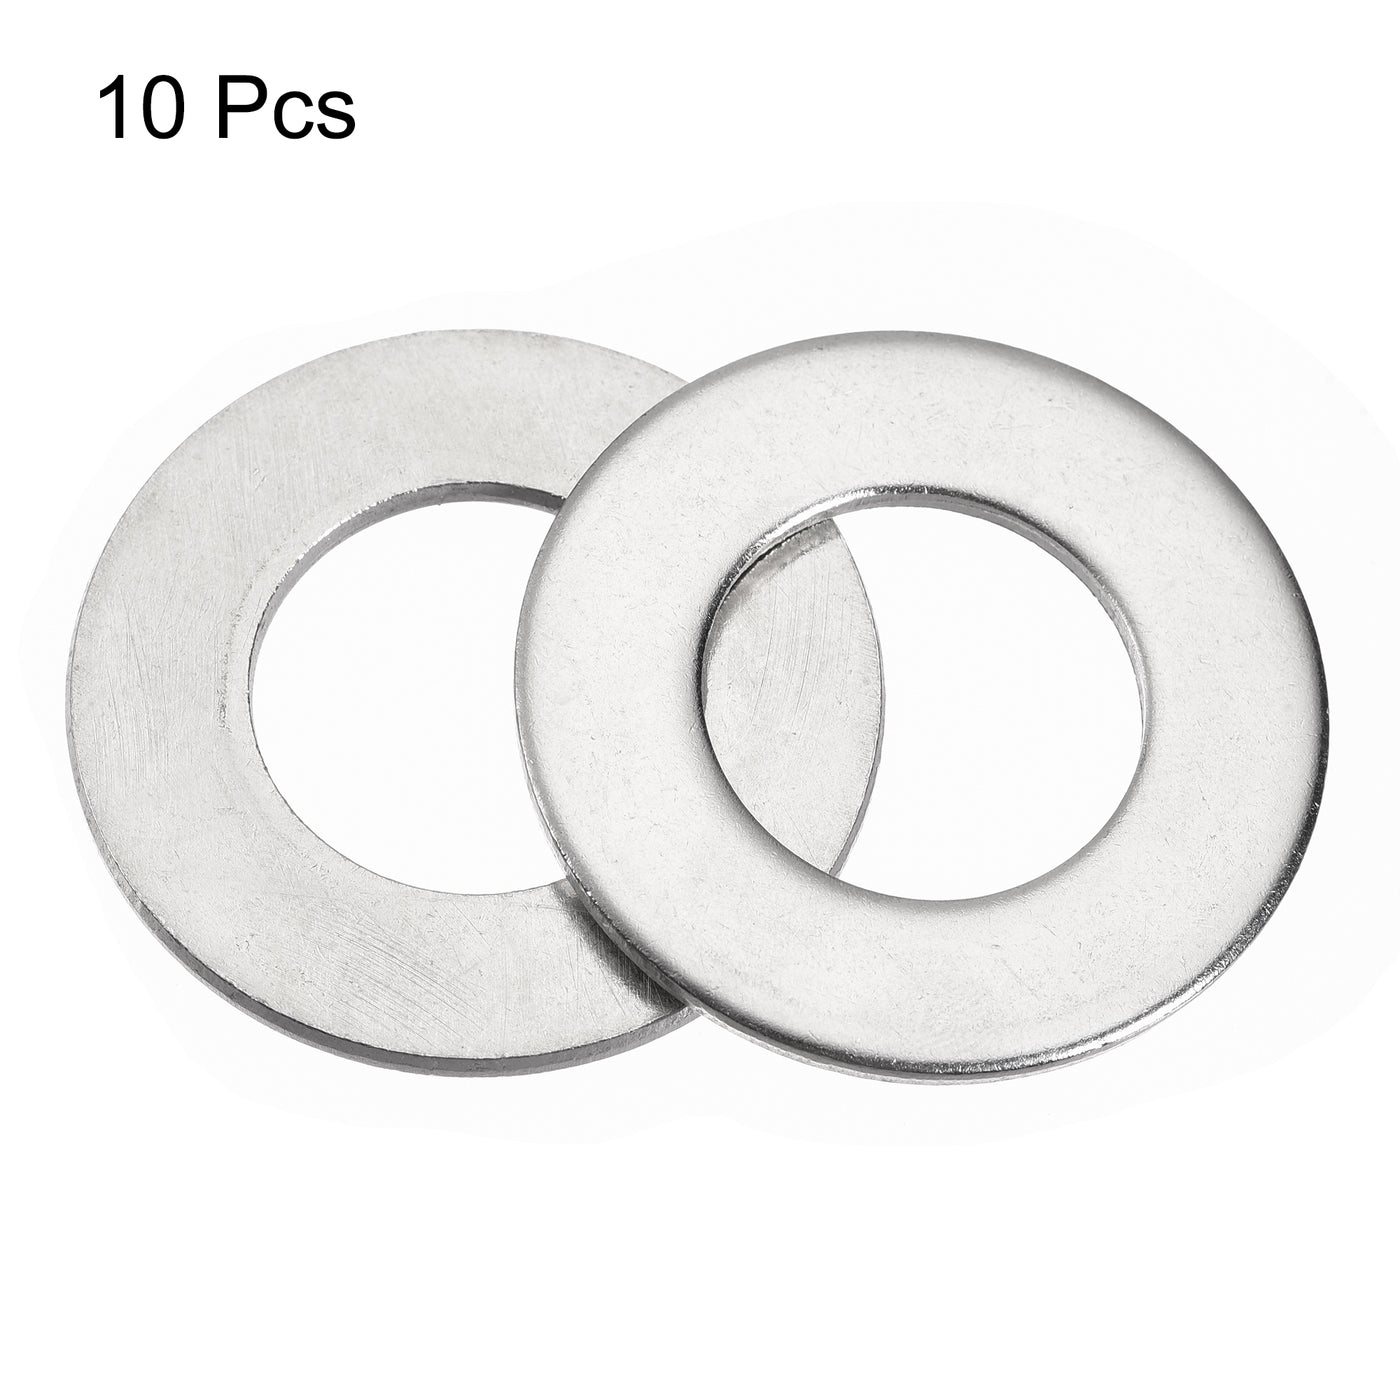 uxcell Uxcell 316 Stainless Steel Flat Washer for Screw Bolt